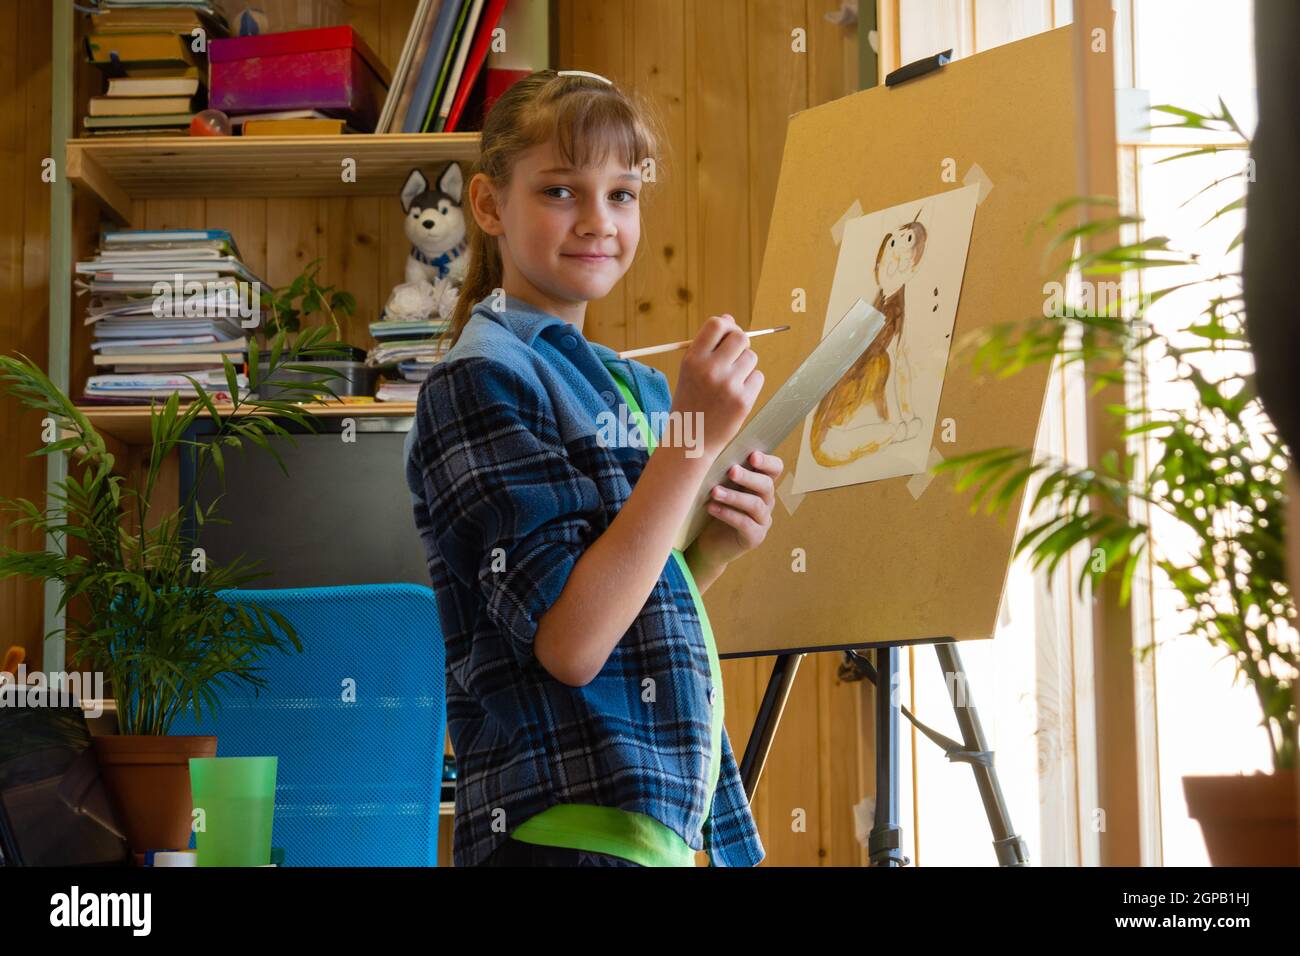 The girl was distracted from drawing on the easel and looked into the frame Stock Photo